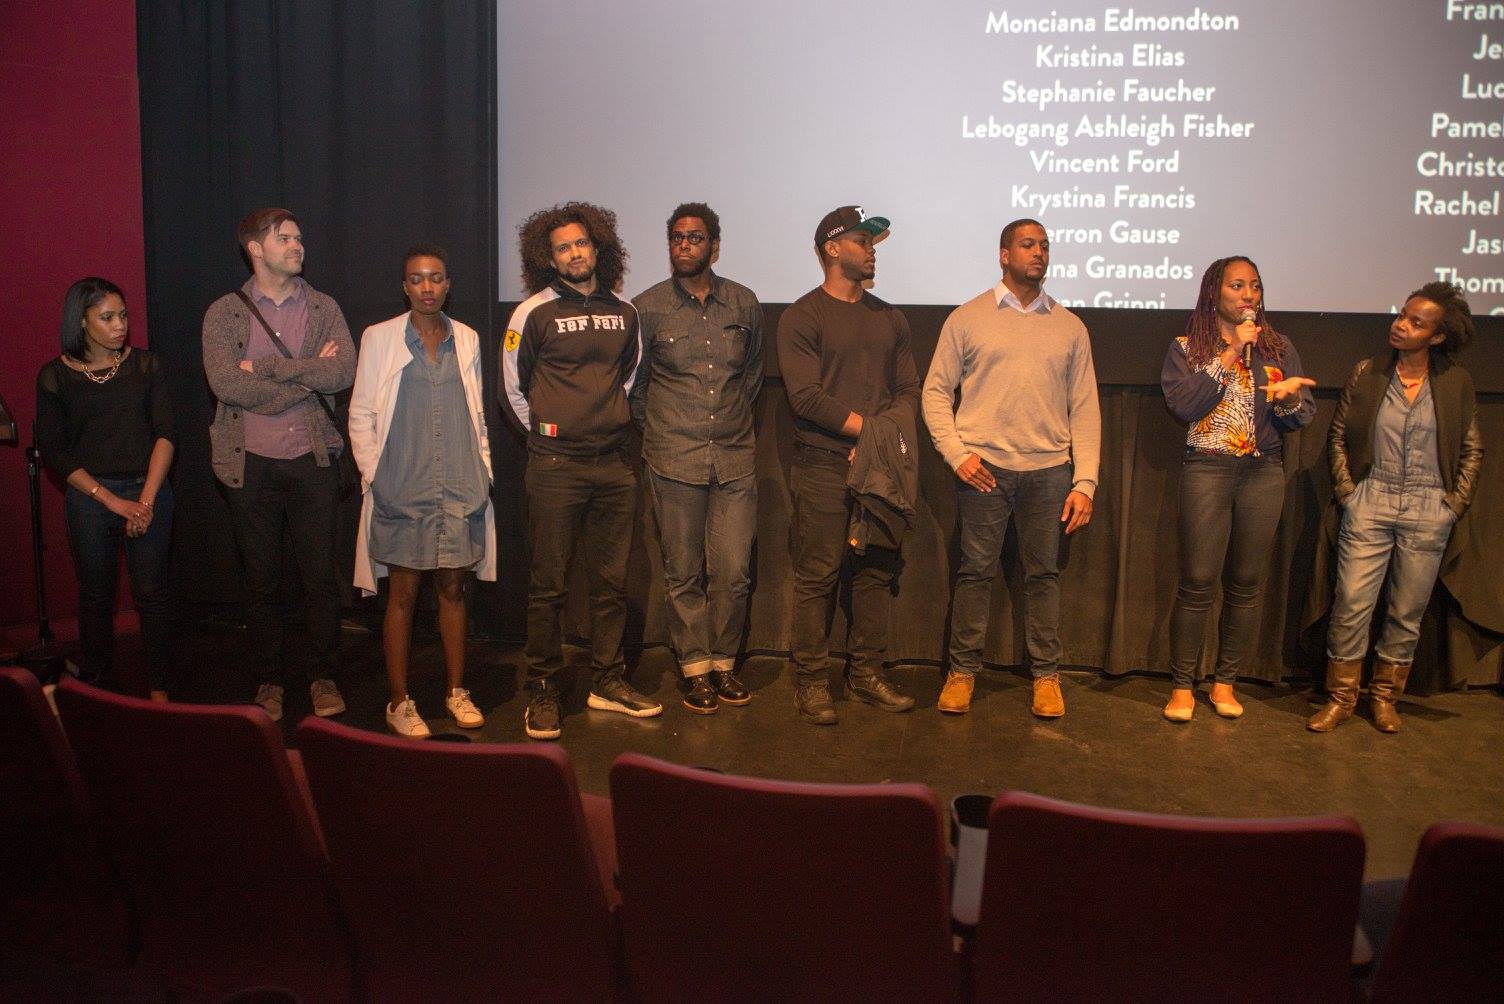  Nigerian film director Iquo B. Essien screens New York, I Love You at the New Voices in Black Cinema Festival at Brooklyn Academy of Music. The film screened with fellow NYU Tisch alum Tahir Jetter's How to Tell You're a Douchebag. 